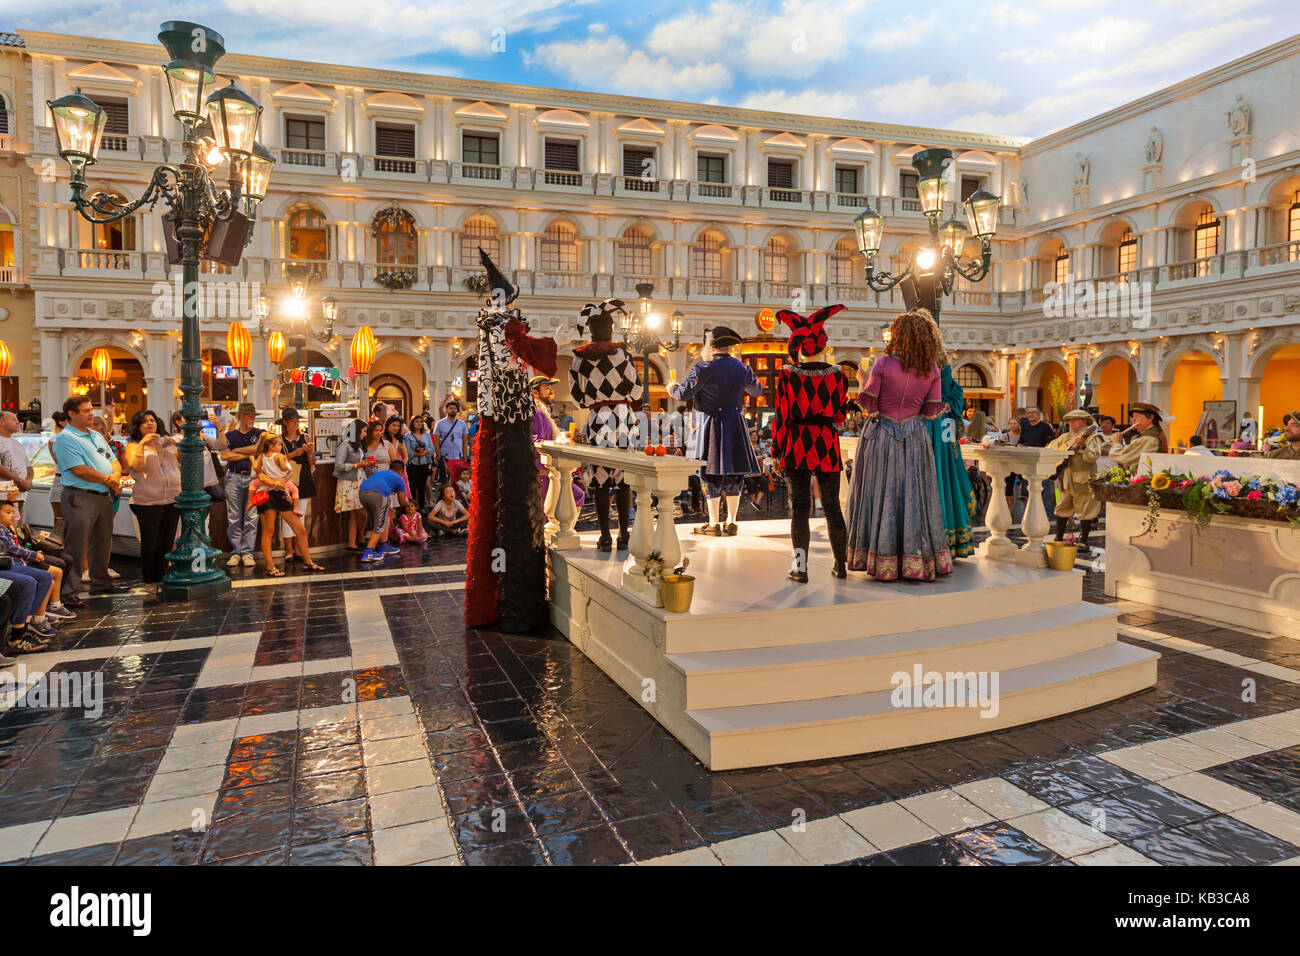 Renaissance actors in period costumes perform in The Venetian Mall in Las Vegas, Nevada. Stock Photo